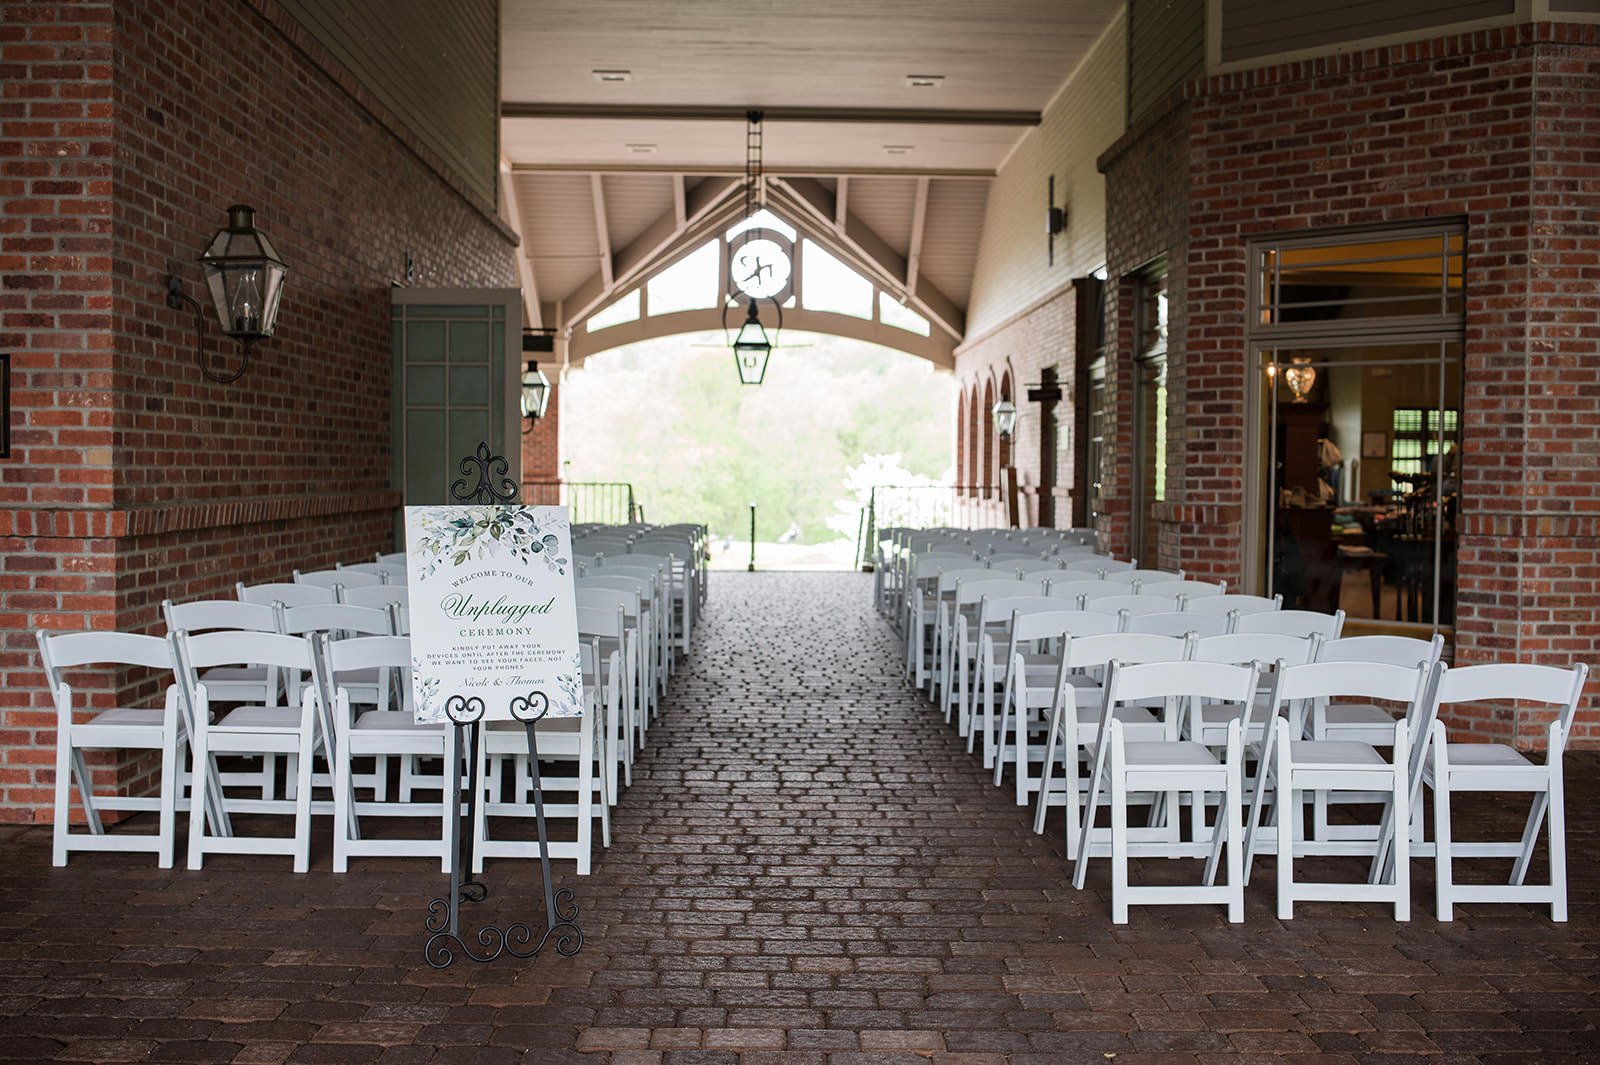 Great river golf club outdoor ceremony space